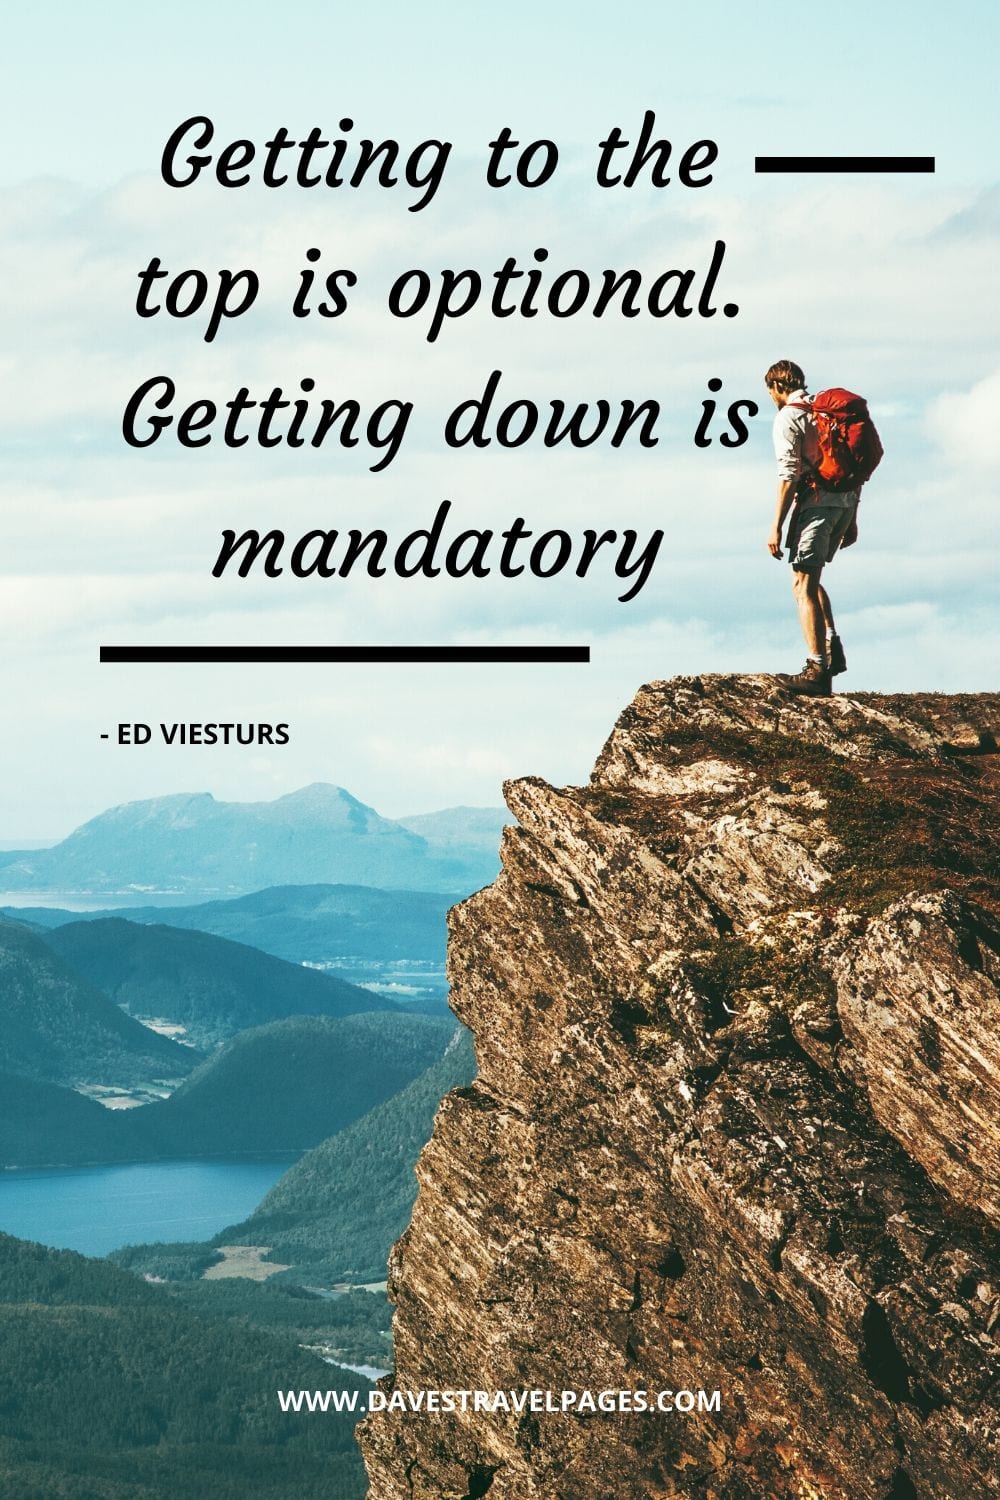 Motivational sayings and quotes: Getting to the top is optional. Getting down is mandatory - Ed Viesturs